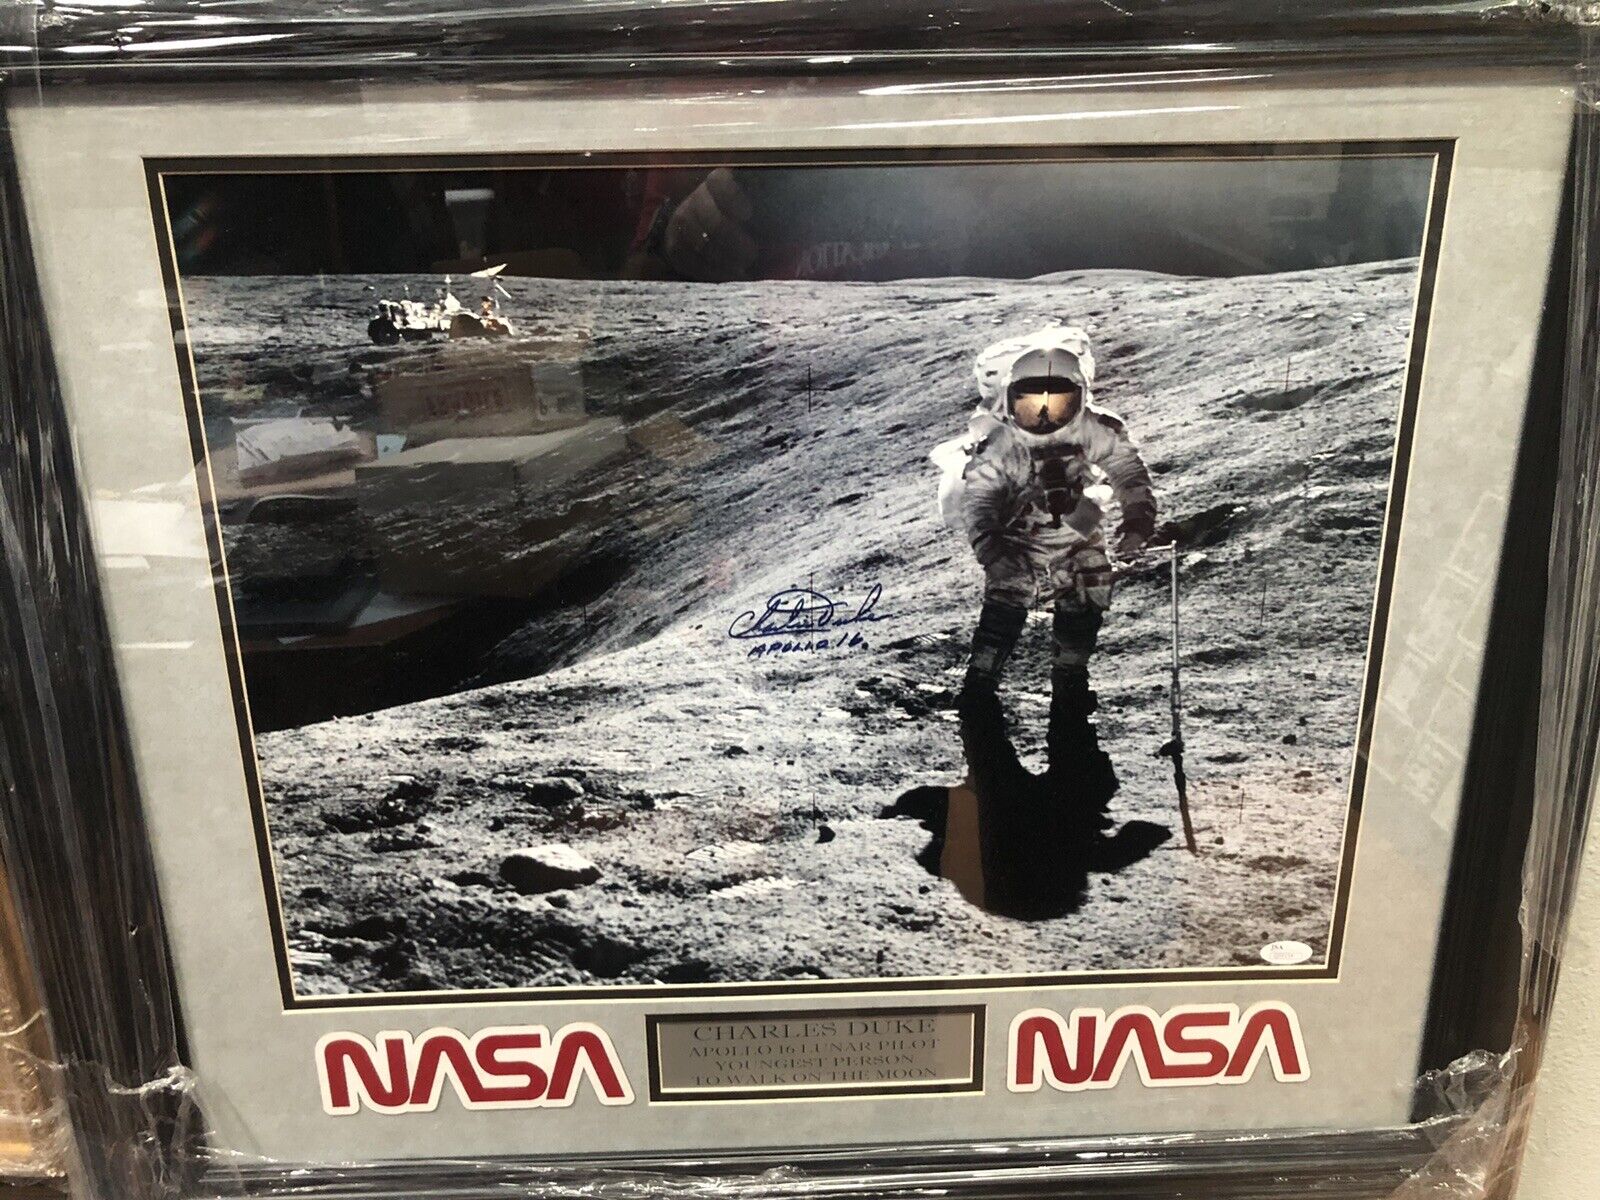 Charles Dukes Apollo 16 autographed framed 16x20 photo JSA Authentication